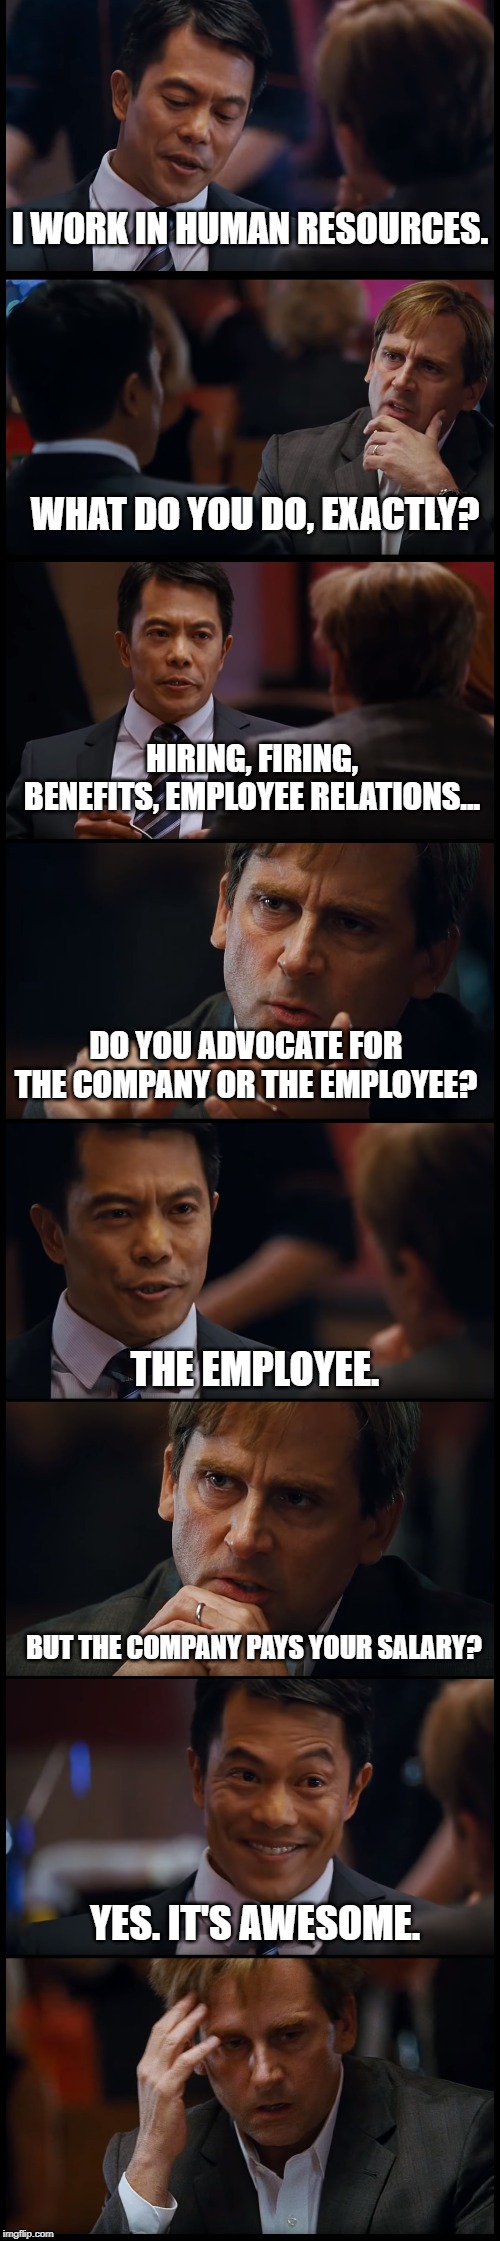 HR | I WORK IN HUMAN RESOURCES. WHAT DO YOU DO, EXACTLY? HIRING, FIRING, BENEFITS, EMPLOYEE RELATIONS... DO YOU ADVOCATE FOR THE COMPANY OR THE EMPLOYEE? THE EMPLOYEE. BUT THE COMPANY PAYS YOUR SALARY? YES. IT'S AWESOME. | image tagged in hr,human resources,do you really | made w/ Imgflip meme maker